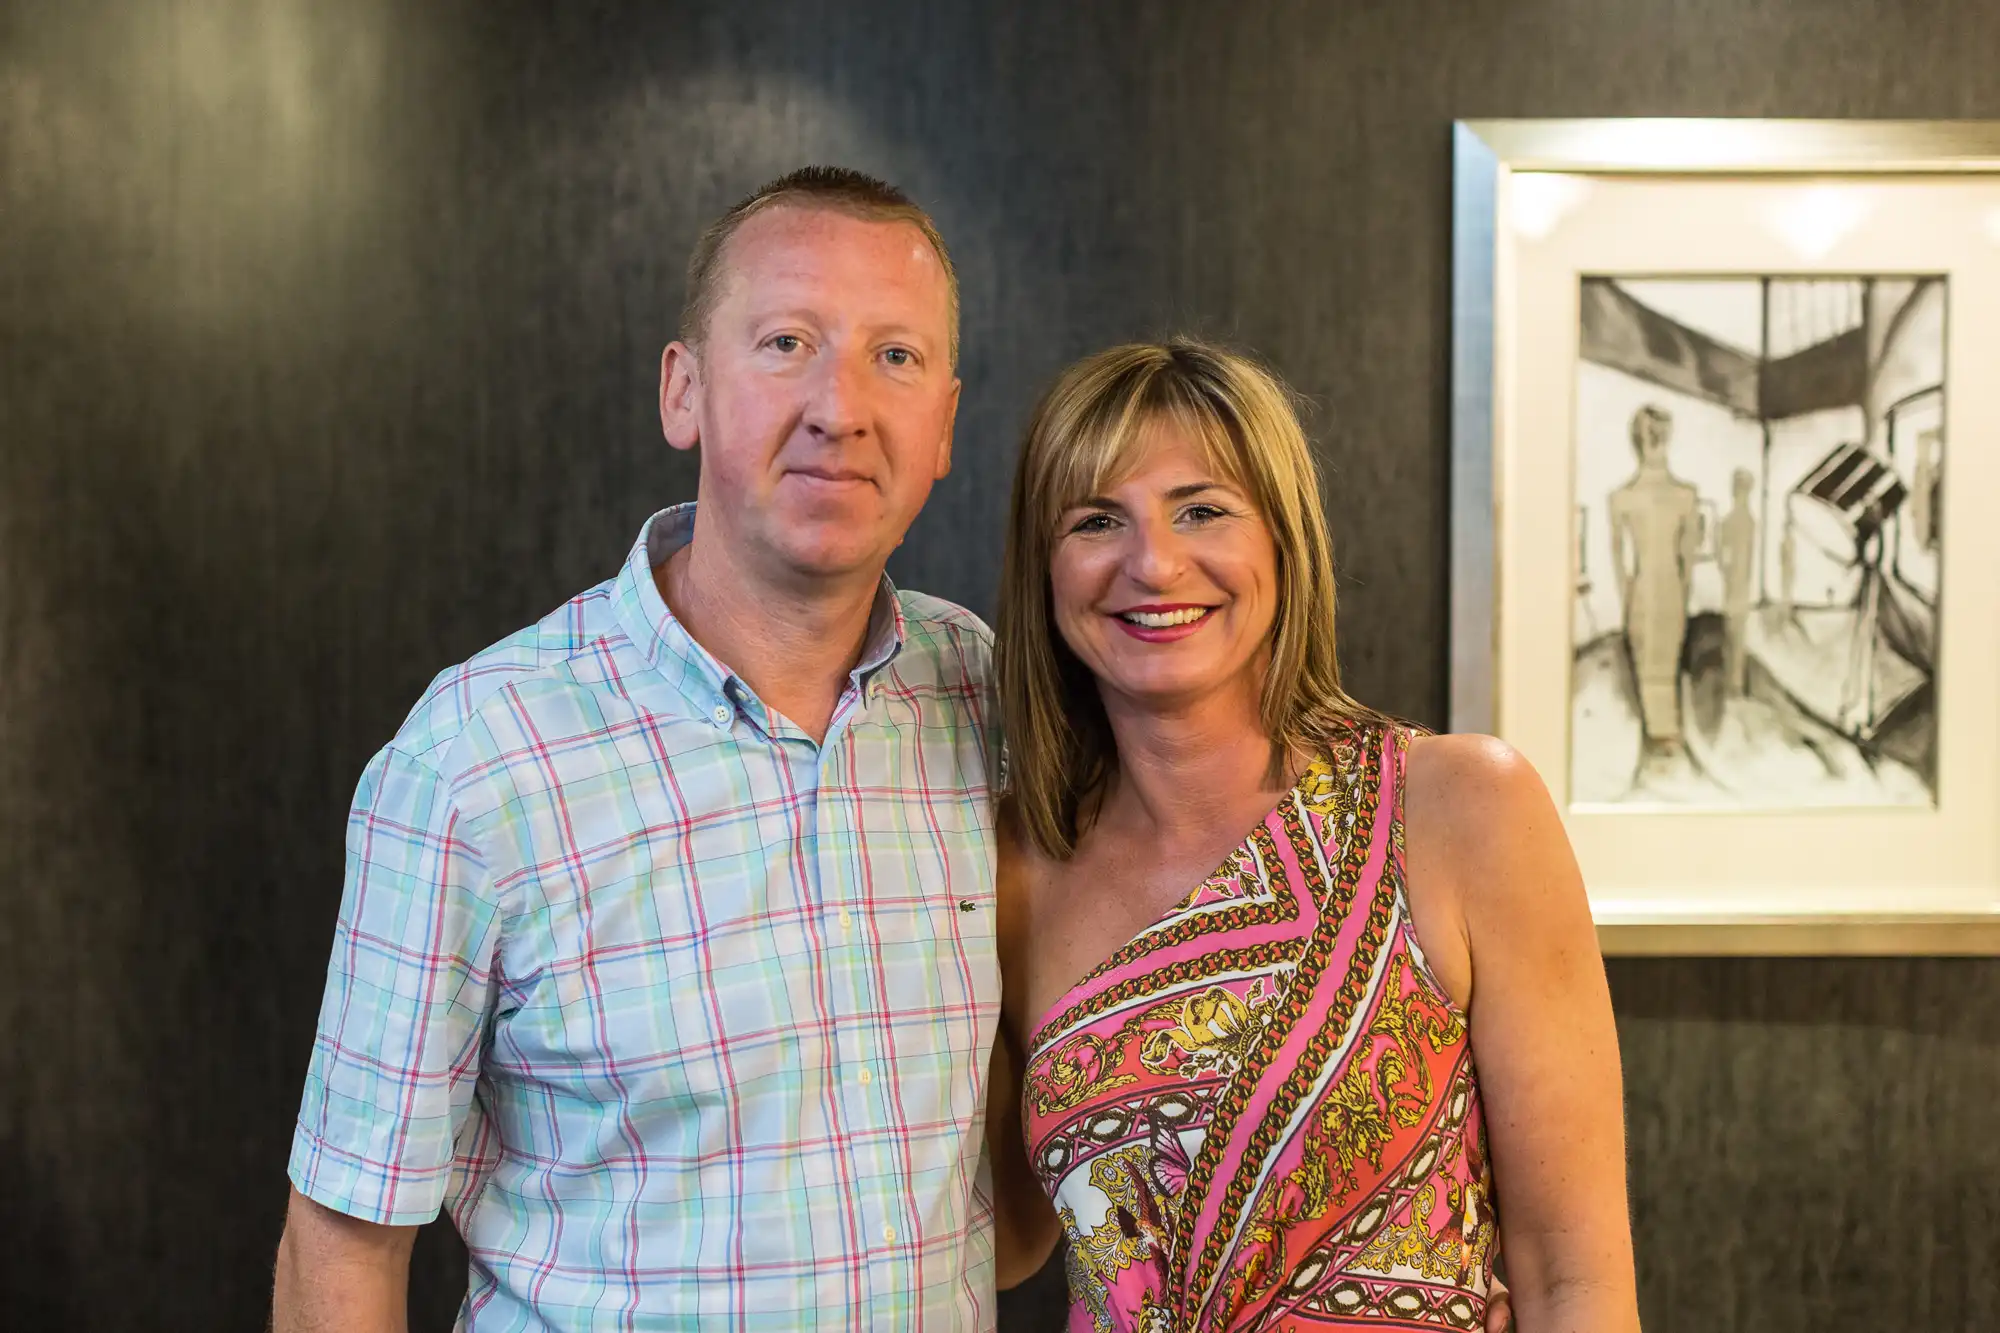 A man and a woman smiling at the camera in a room with a framed sketch on the wall behind them.